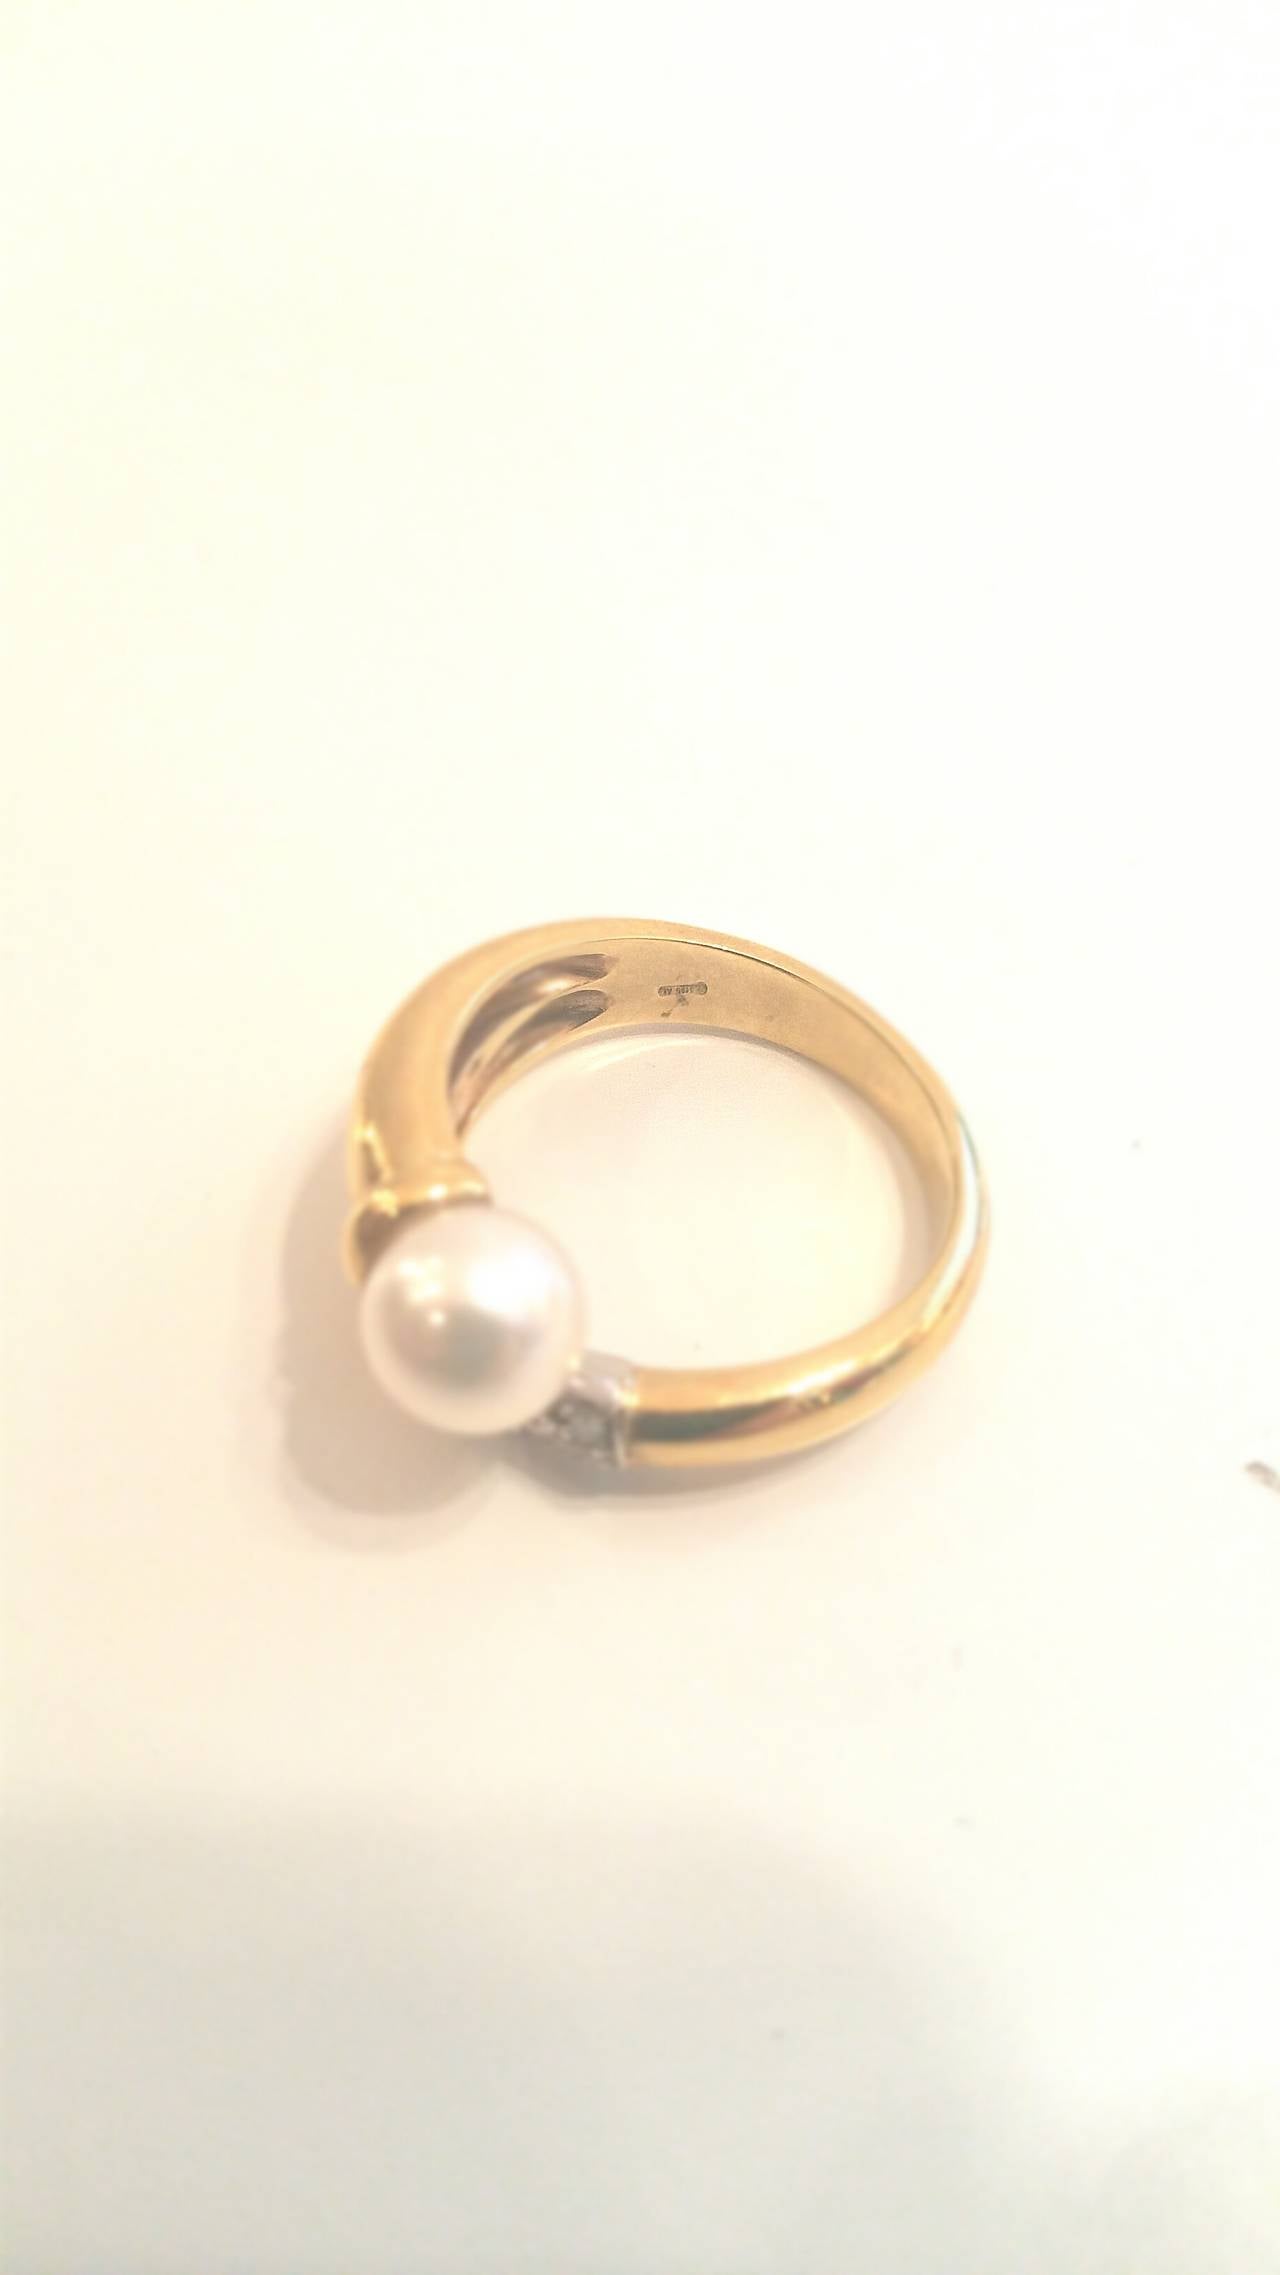 1980s 18kt gold ring with pearl and small 6 diamonds size italian sizing is 18 usa sizing is 8
As ou can imagine this ring can be made smaller.